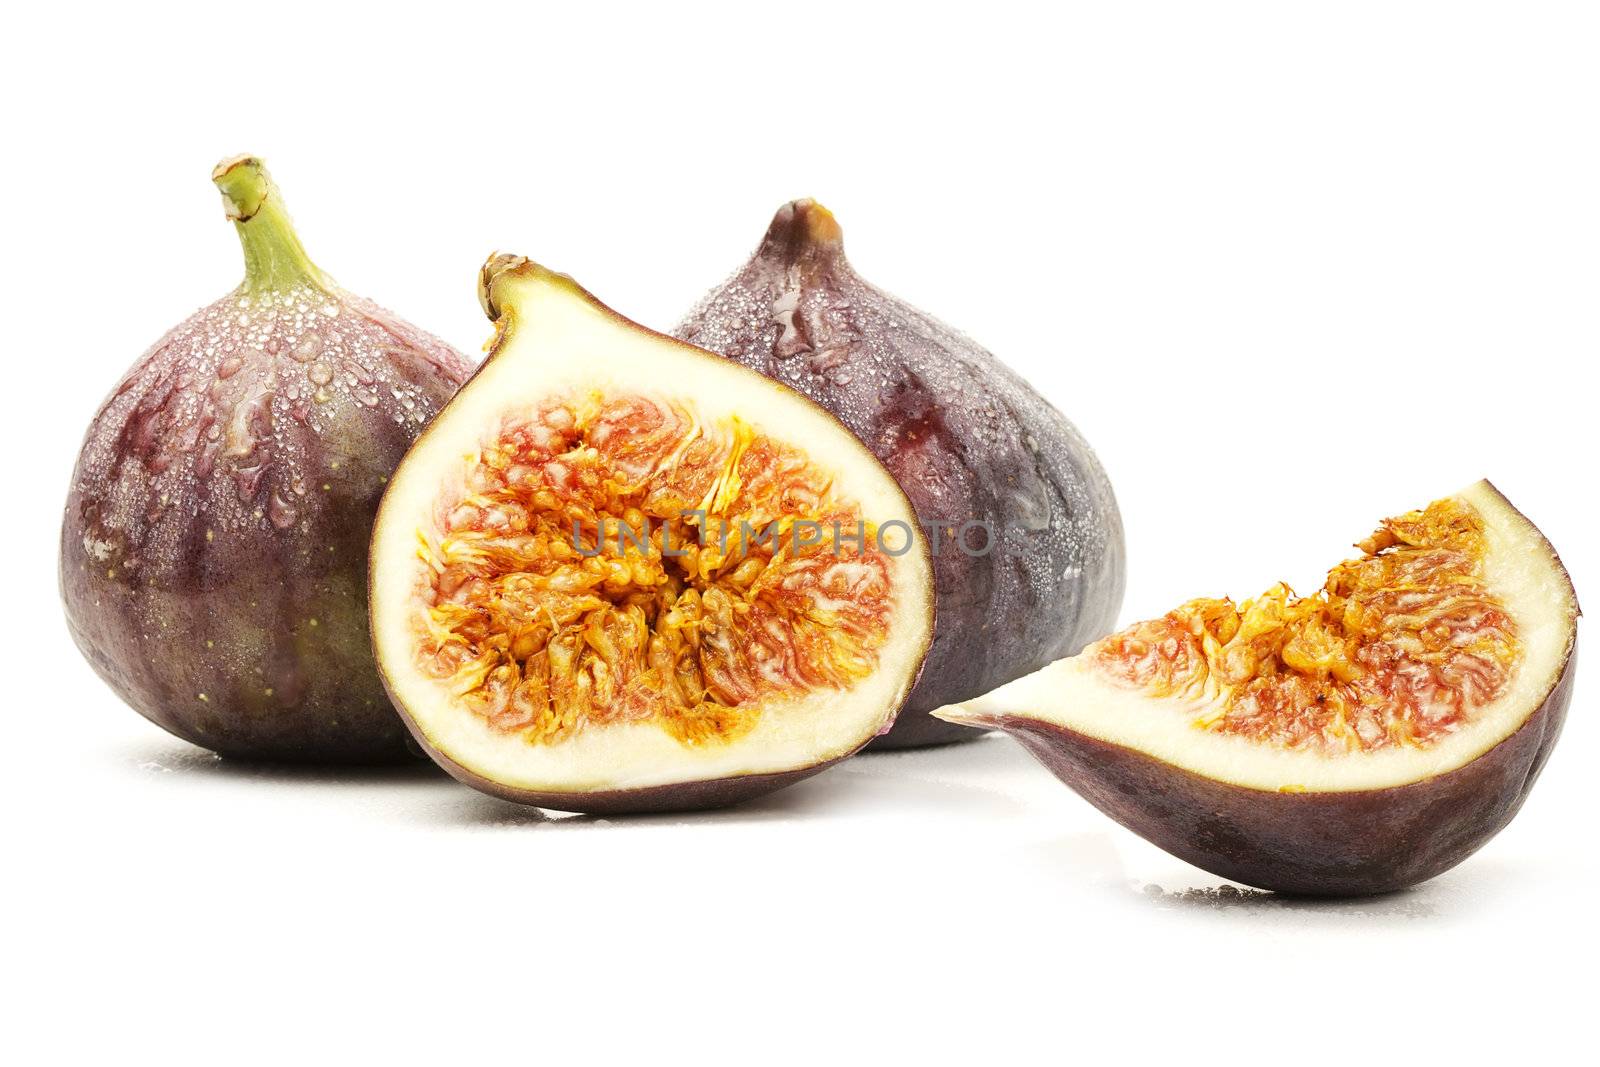 two wet figs and a half and a fig wedge on white background